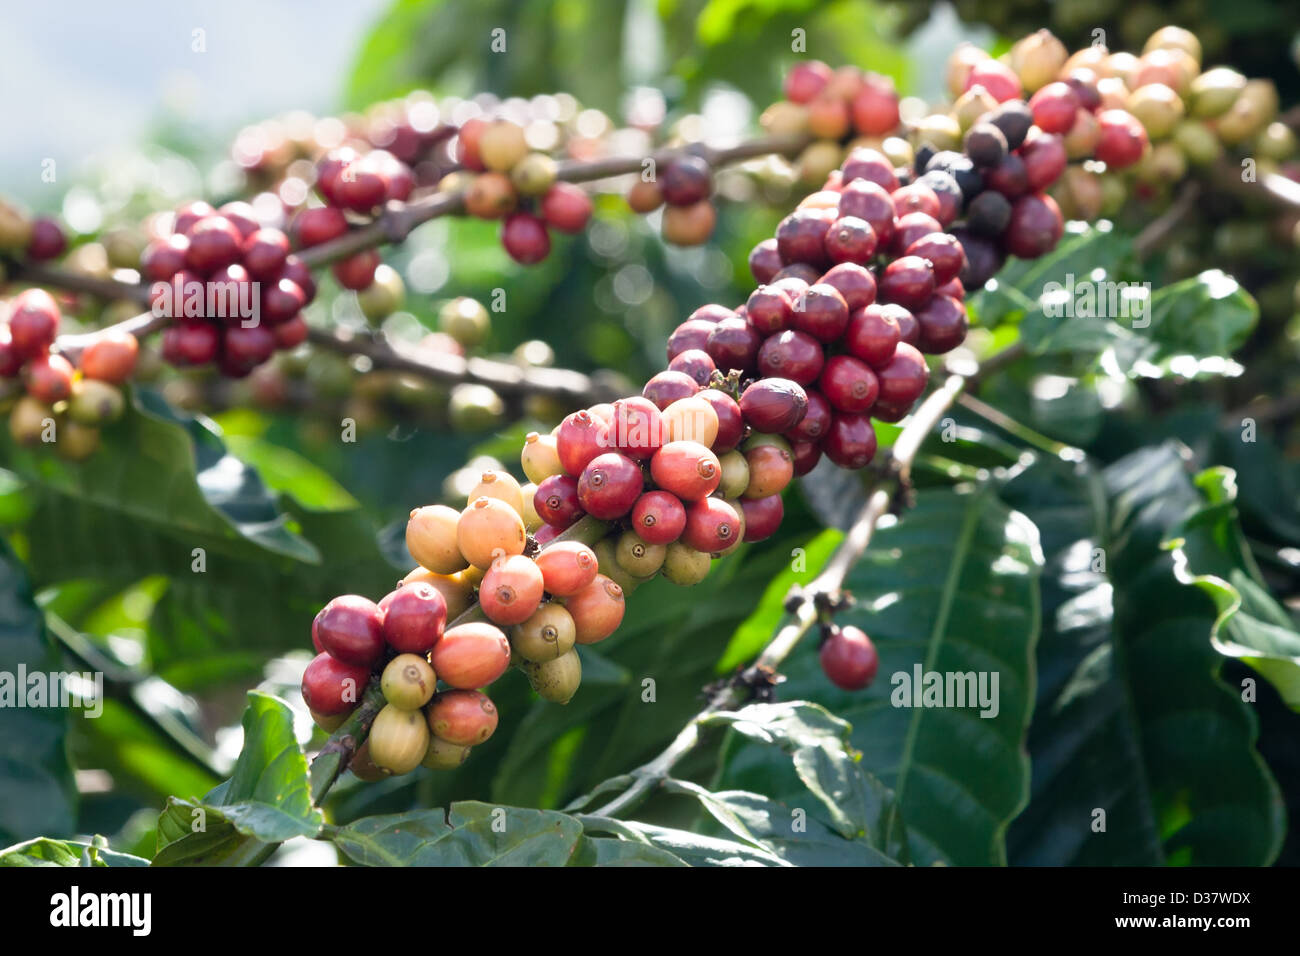 Ripening coffee beans on a tree Stock Photo